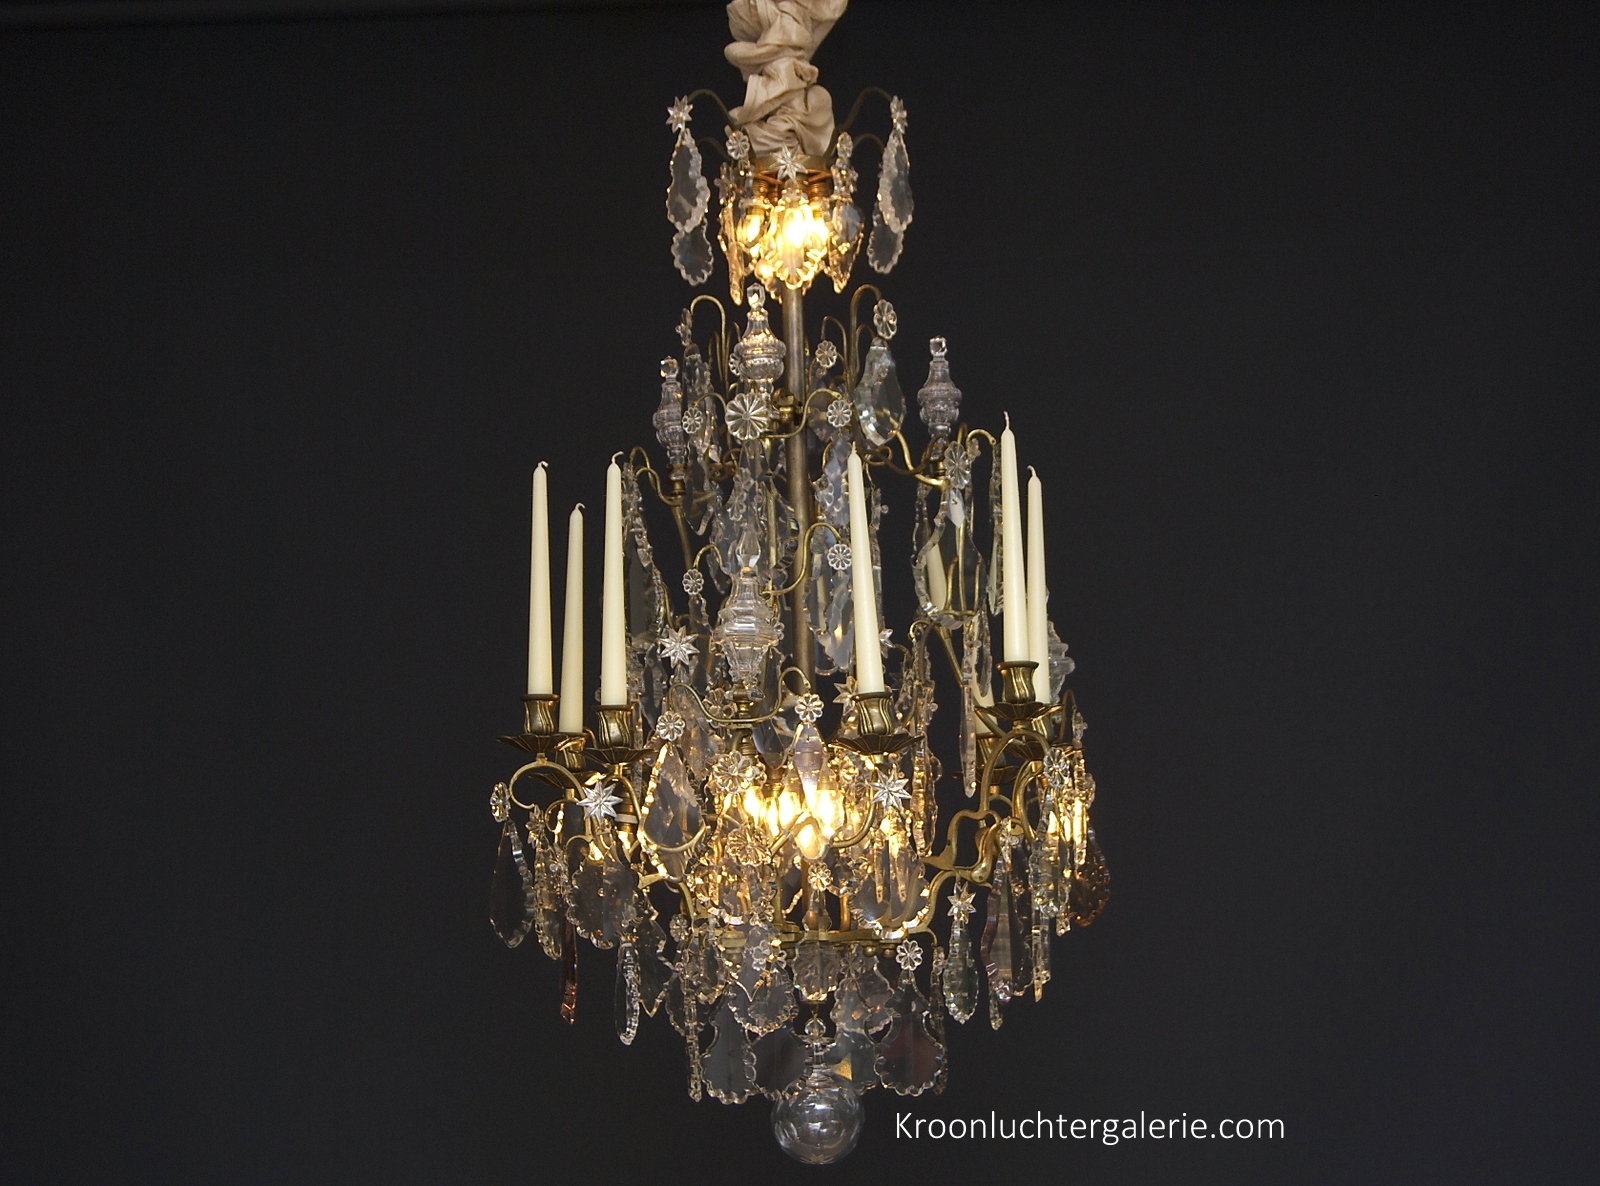 Large chandelier with candles